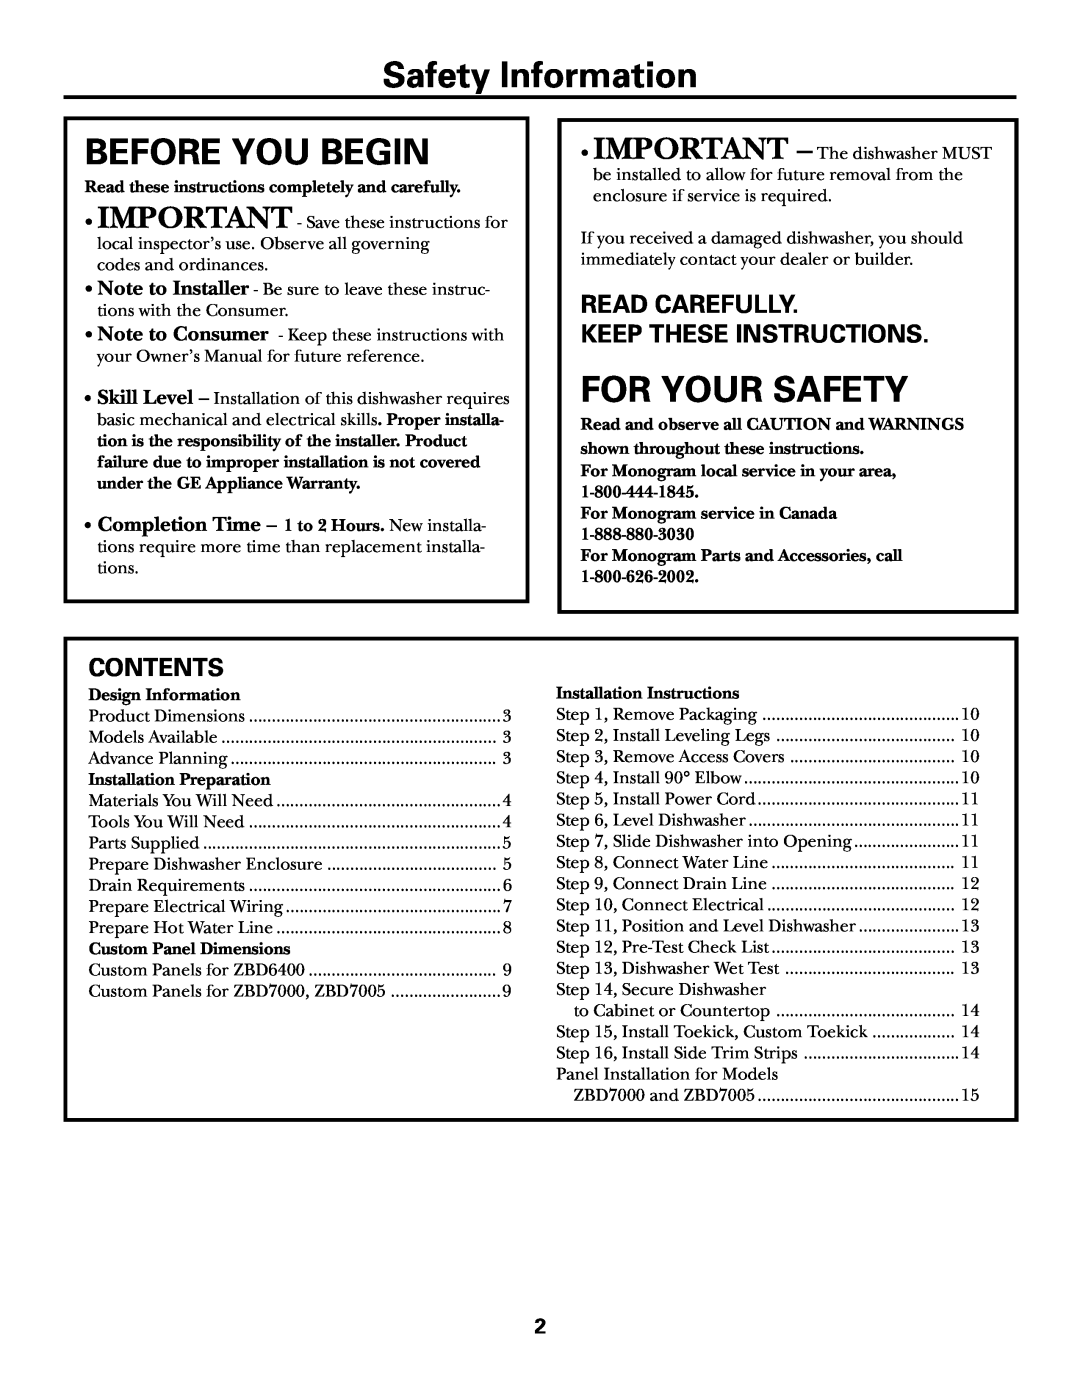 GE Monogram ZBD6400, ZBD6600 Safety Information, Before You Begin, For Your Safety, Read Carefully Keep These Instructions 